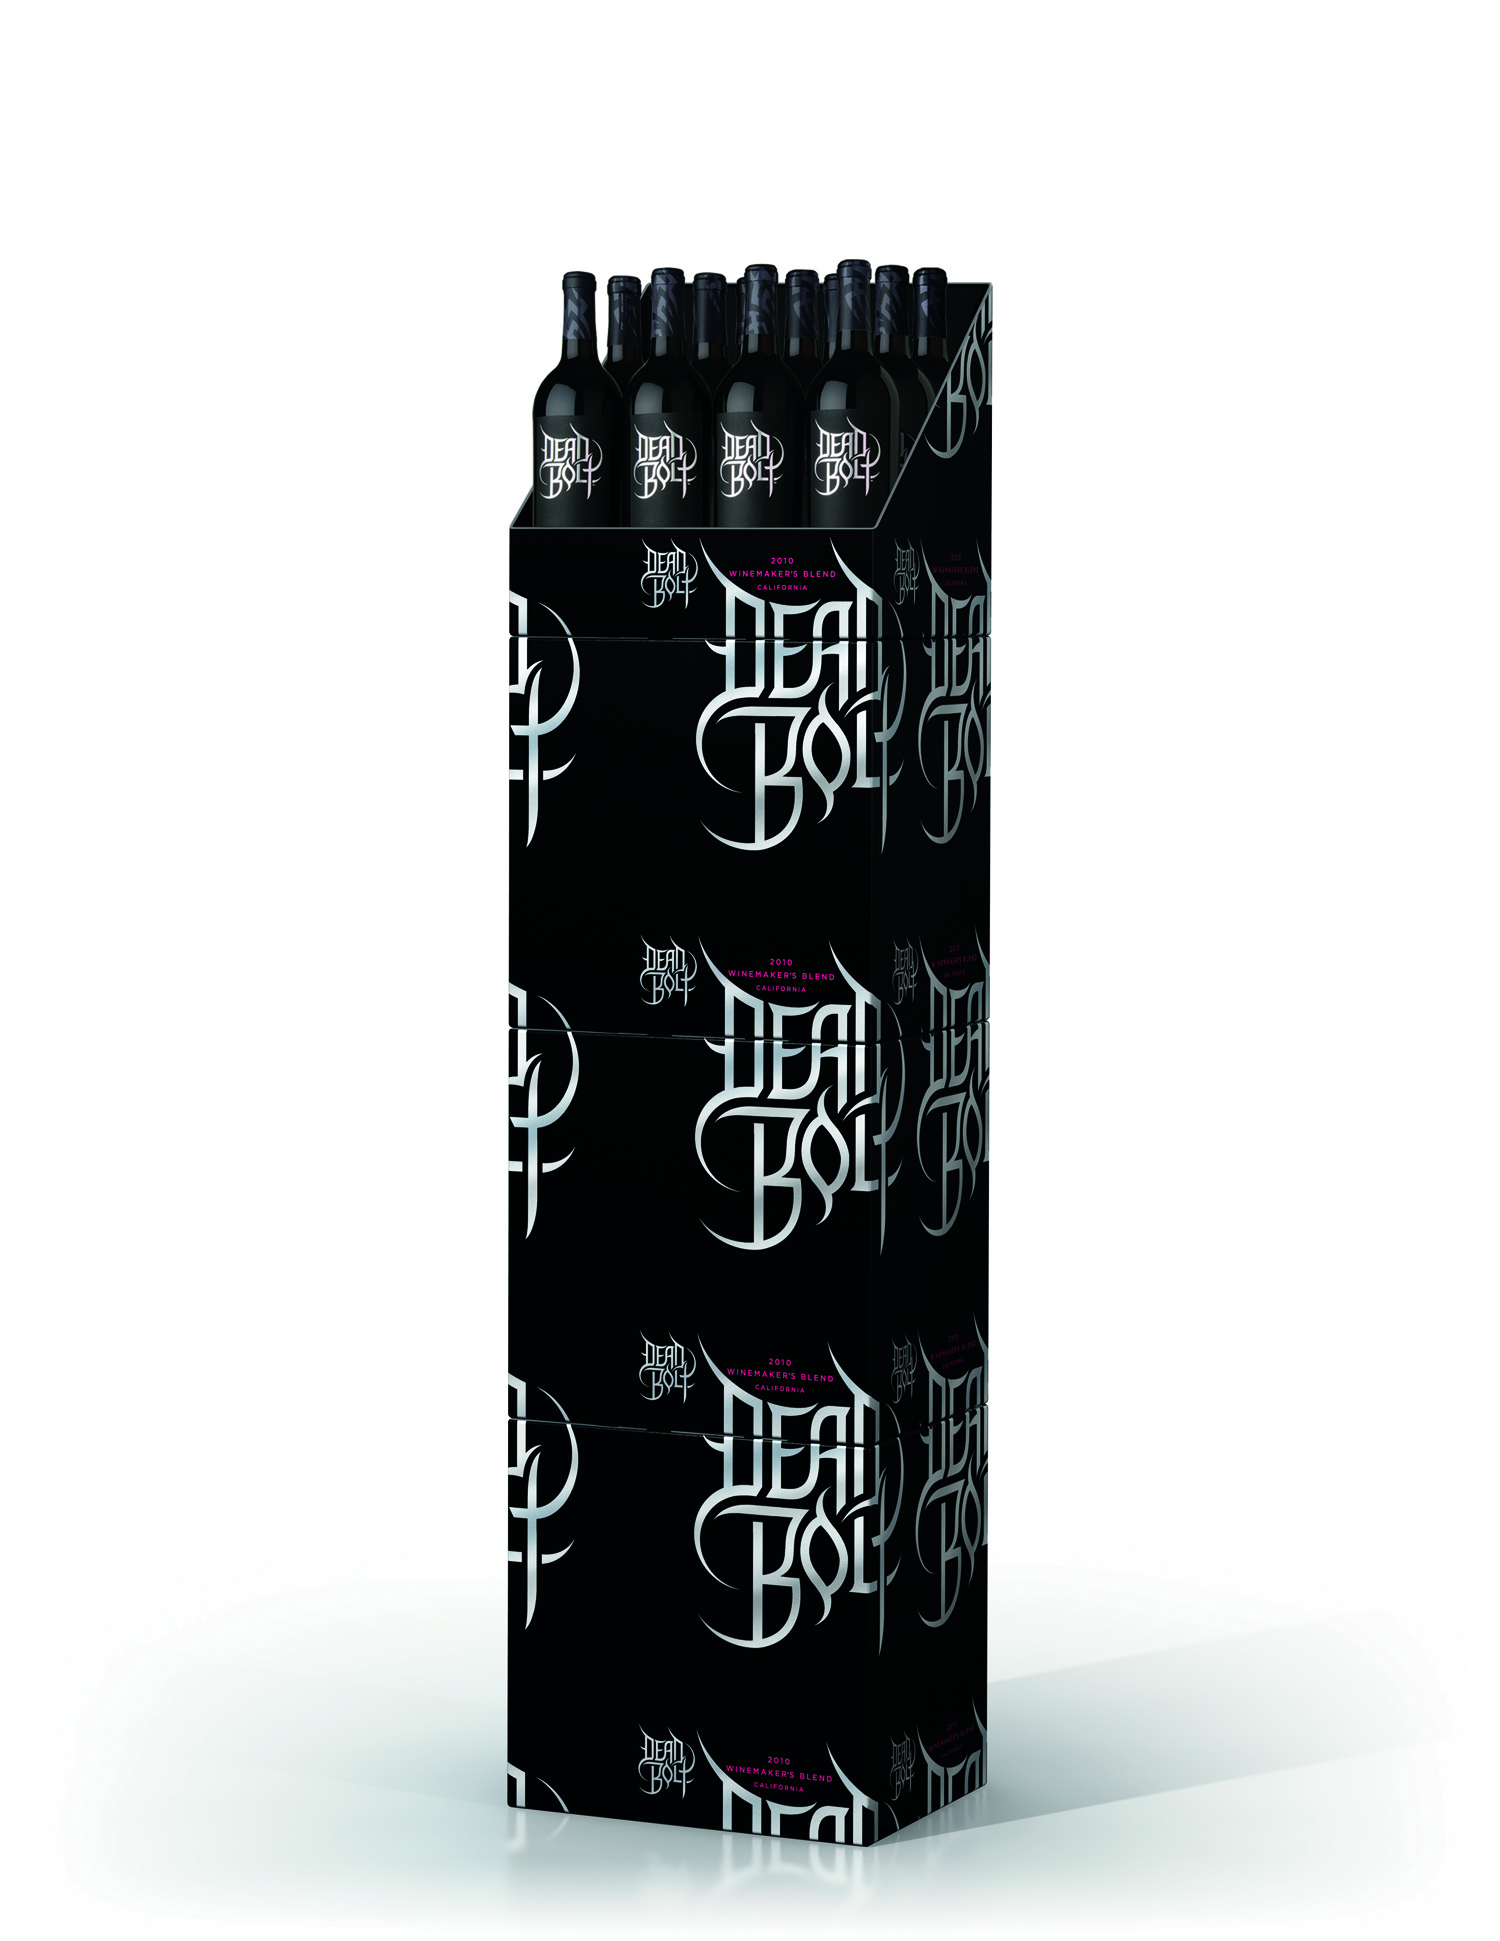 To maintain brand consistency throughout Dead Bolt wine’s packaging, Landor successfully implemented available technologies to produce capsules and cases similar to the wine’s primary packaging.